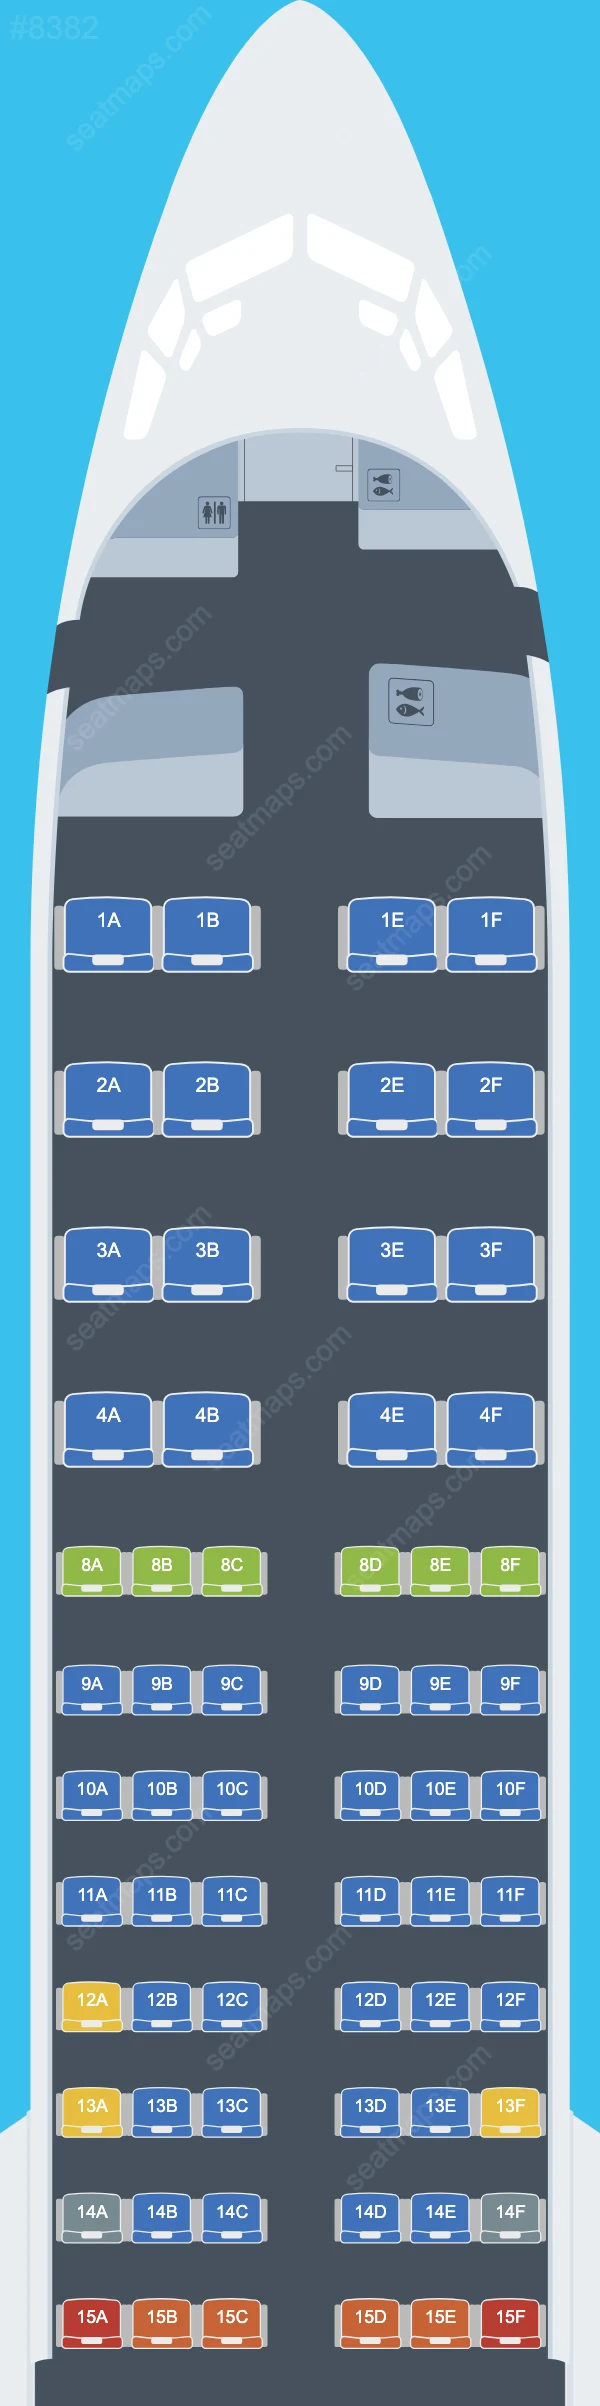 American Airlines Boeing 737 MAX 8 Seat Maps 737 MAX 8